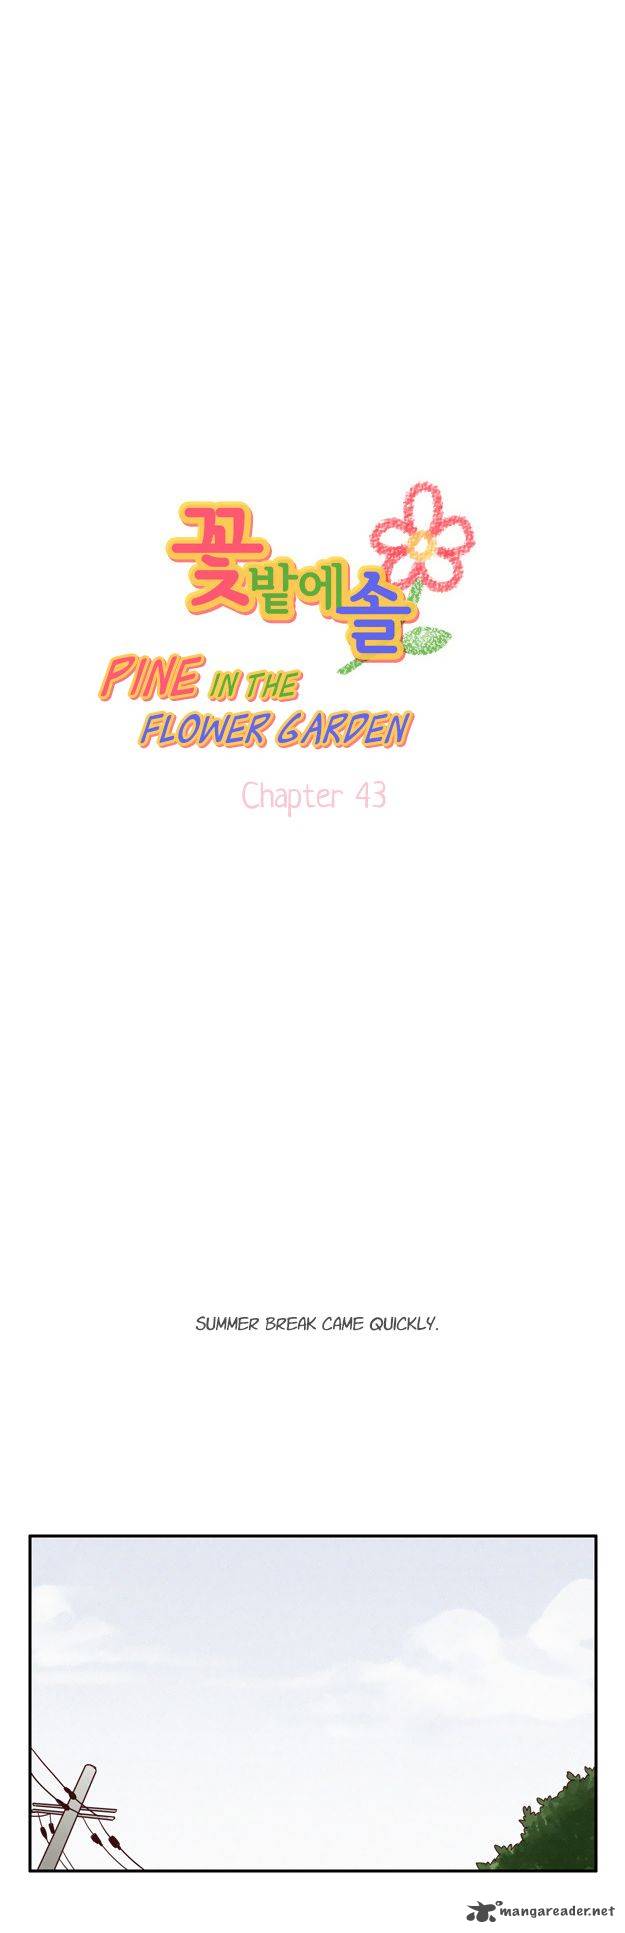 Pine In The Flower Garden Chapter 43 Page 2